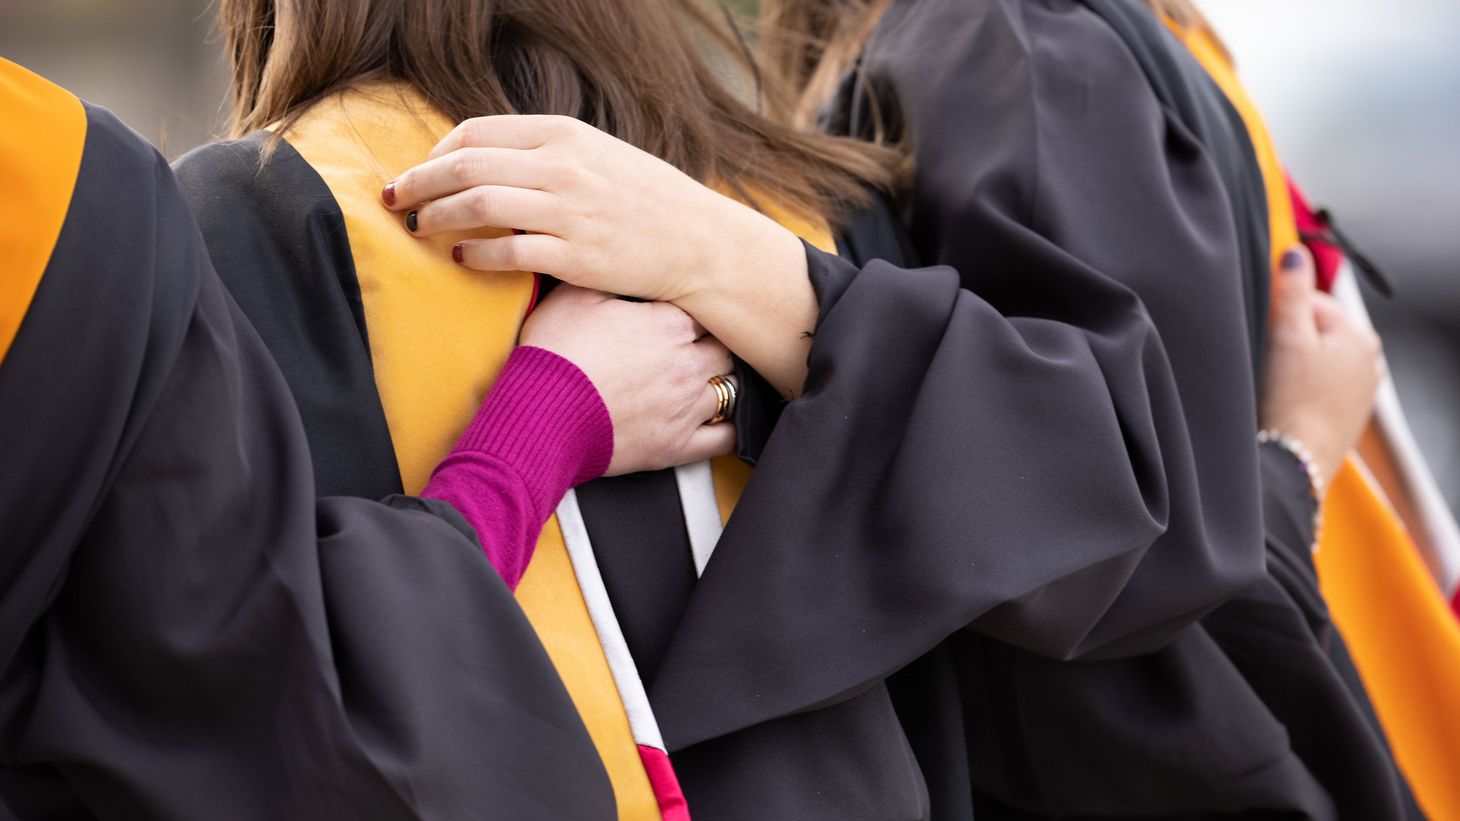 Holding hands during convocation 